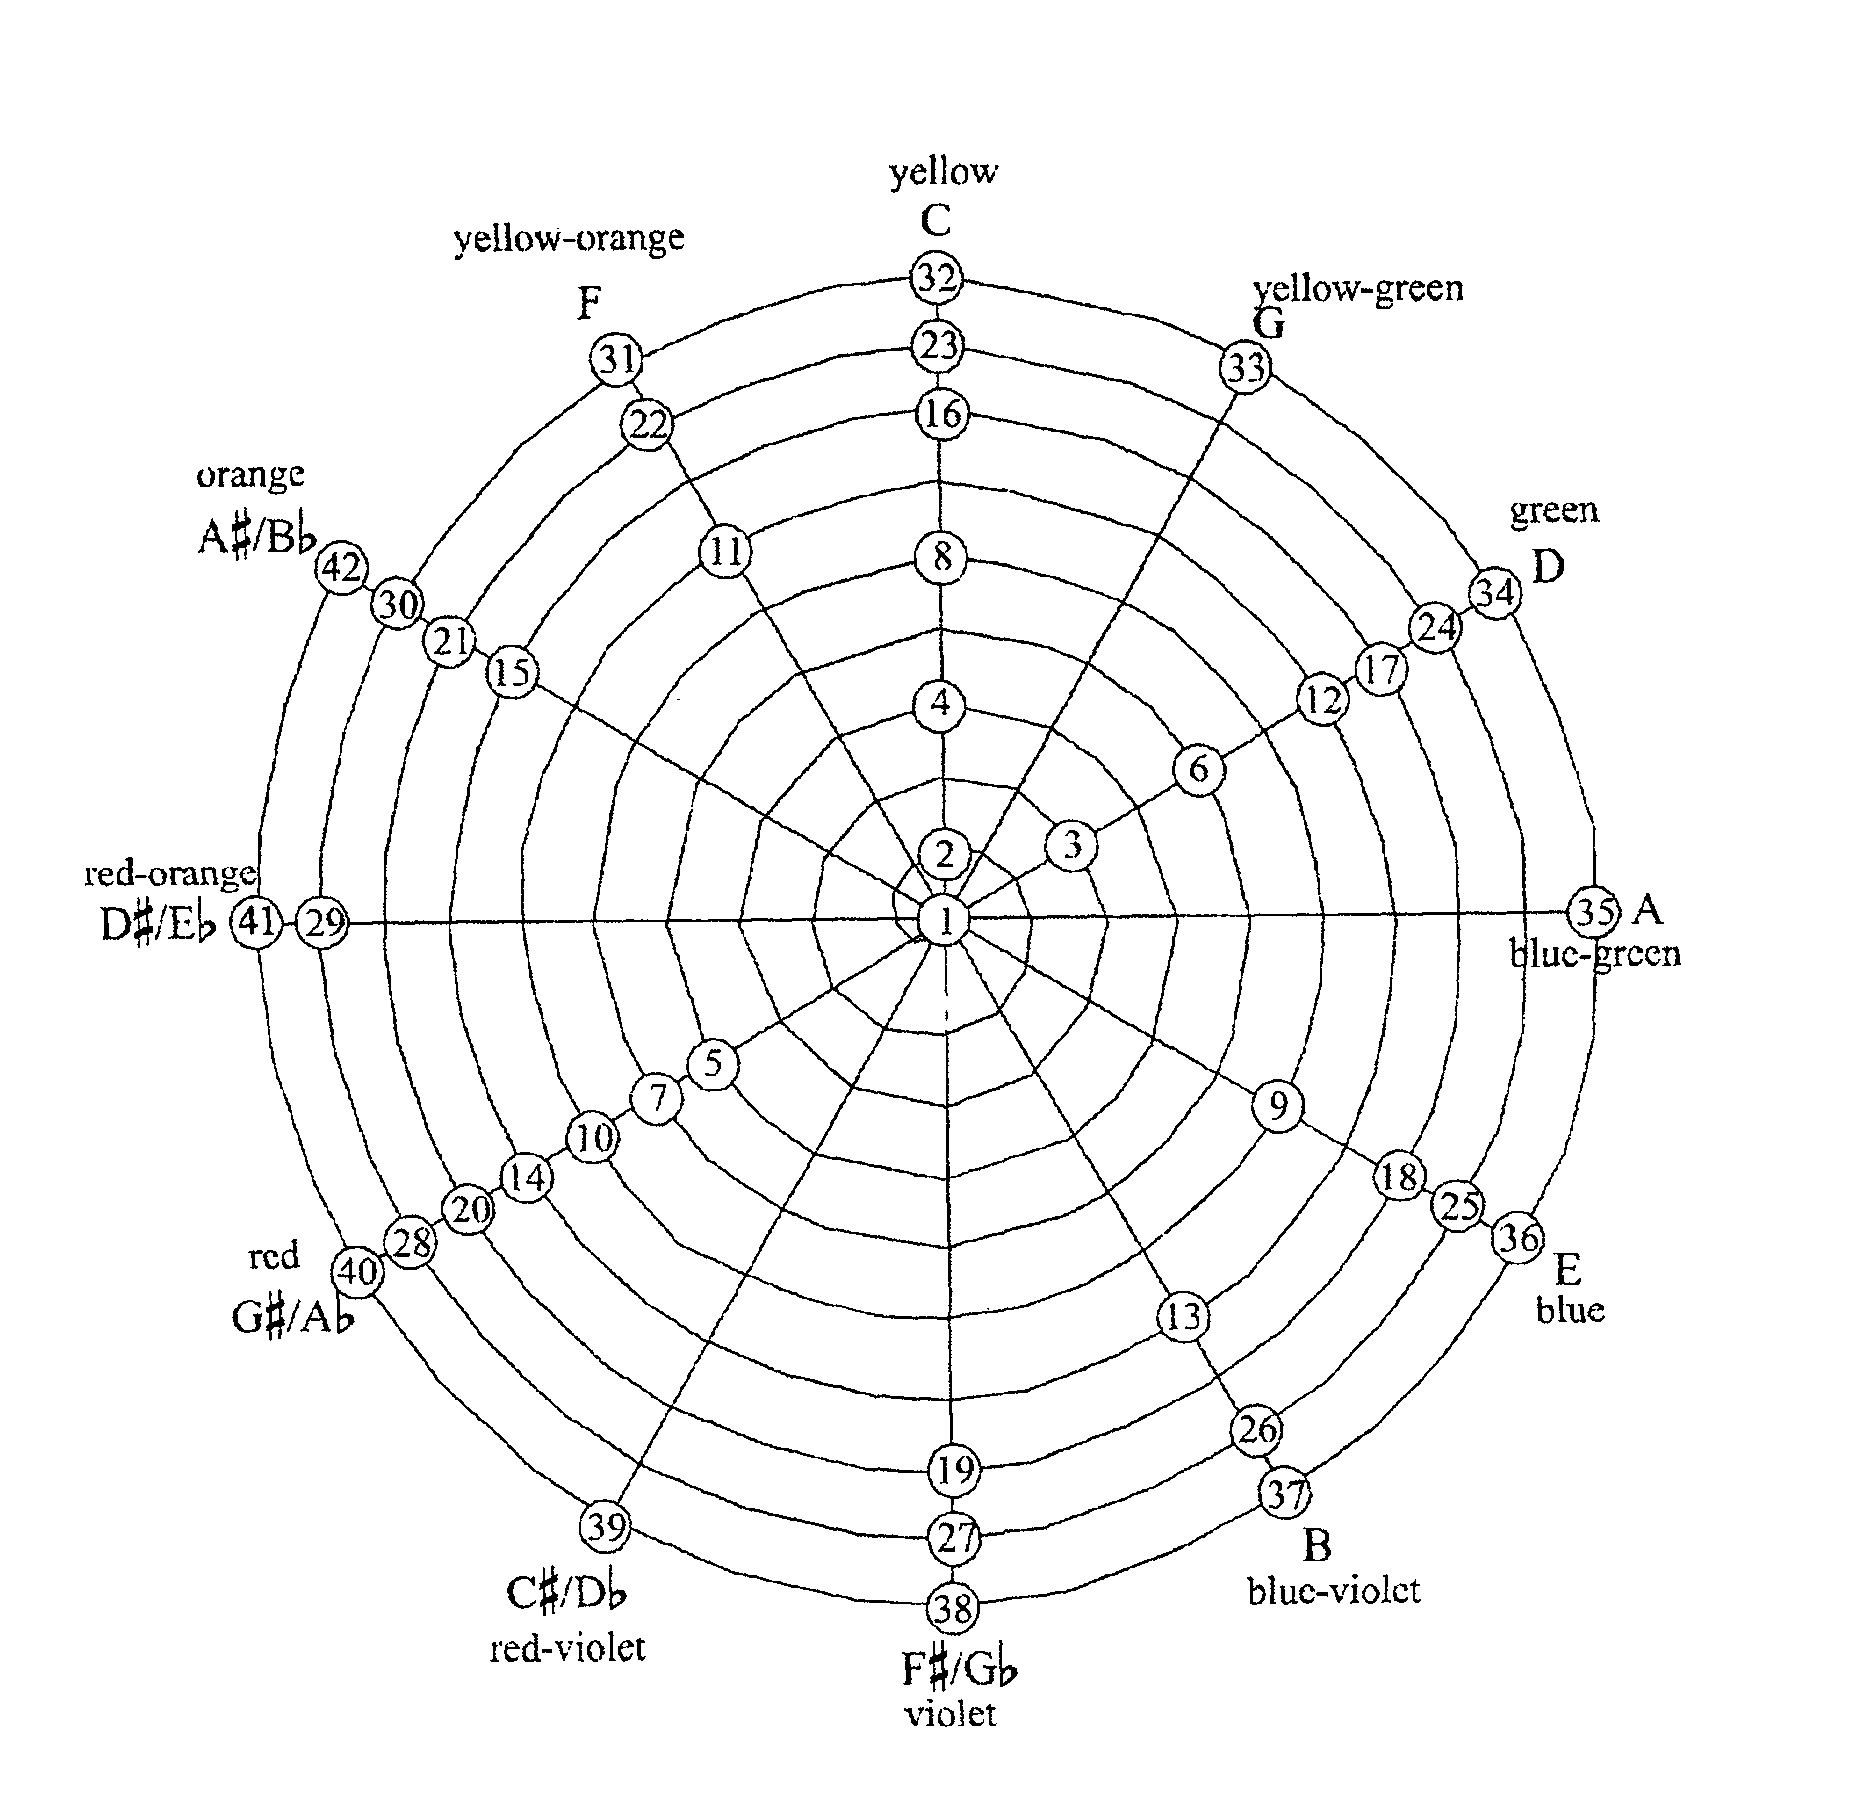 System and method for relating electromagnetic waves to sound waves